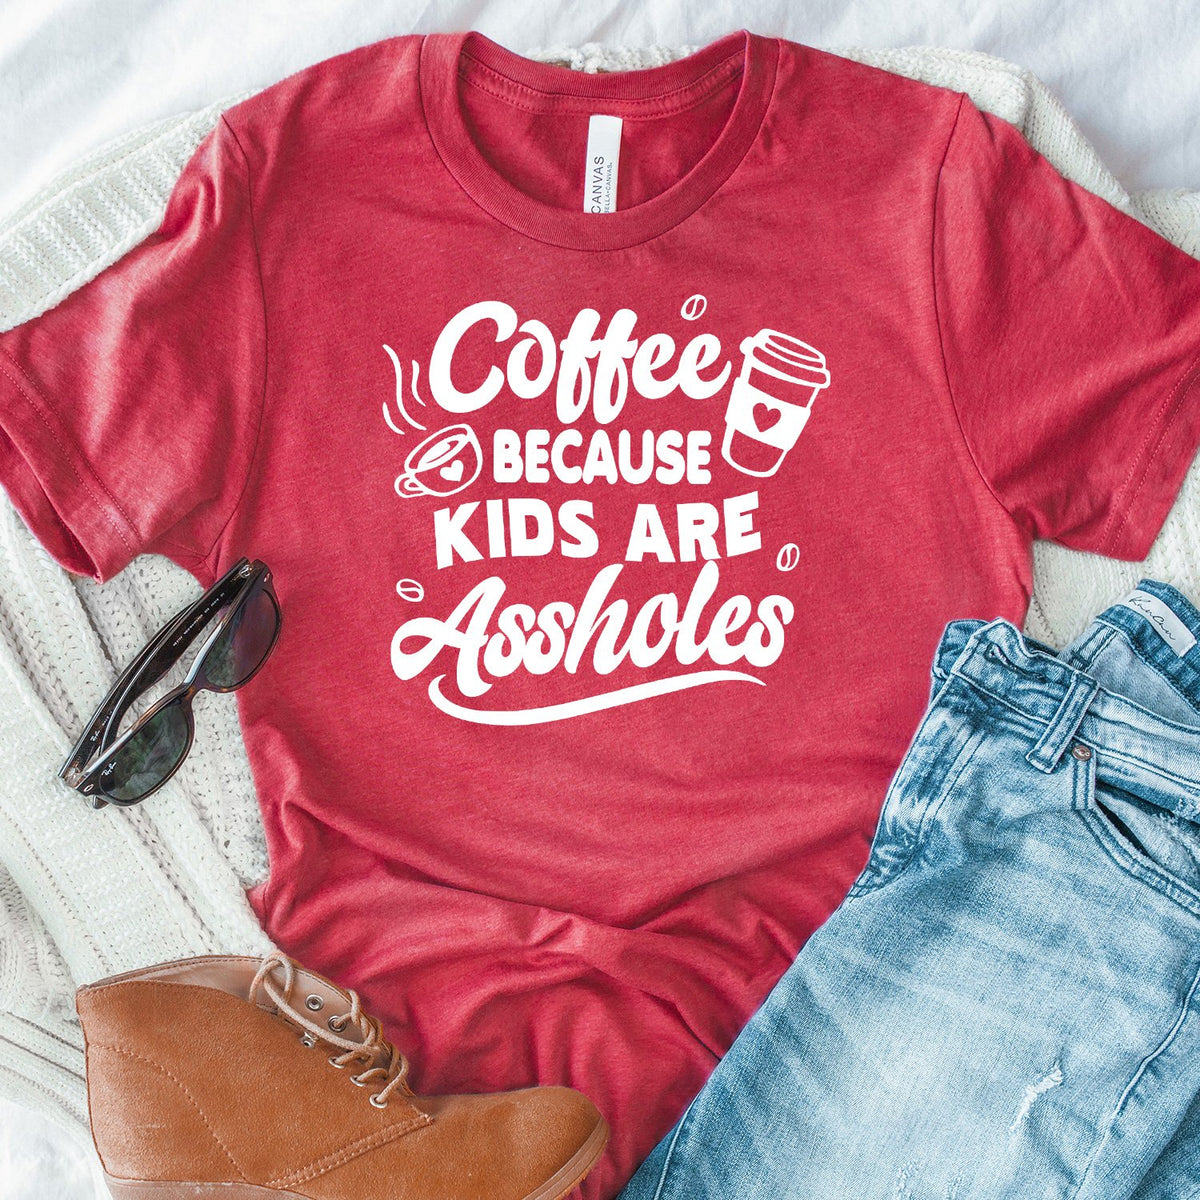 Coffee Because Kids are Assholes - Short Sleeve Tee Shirt